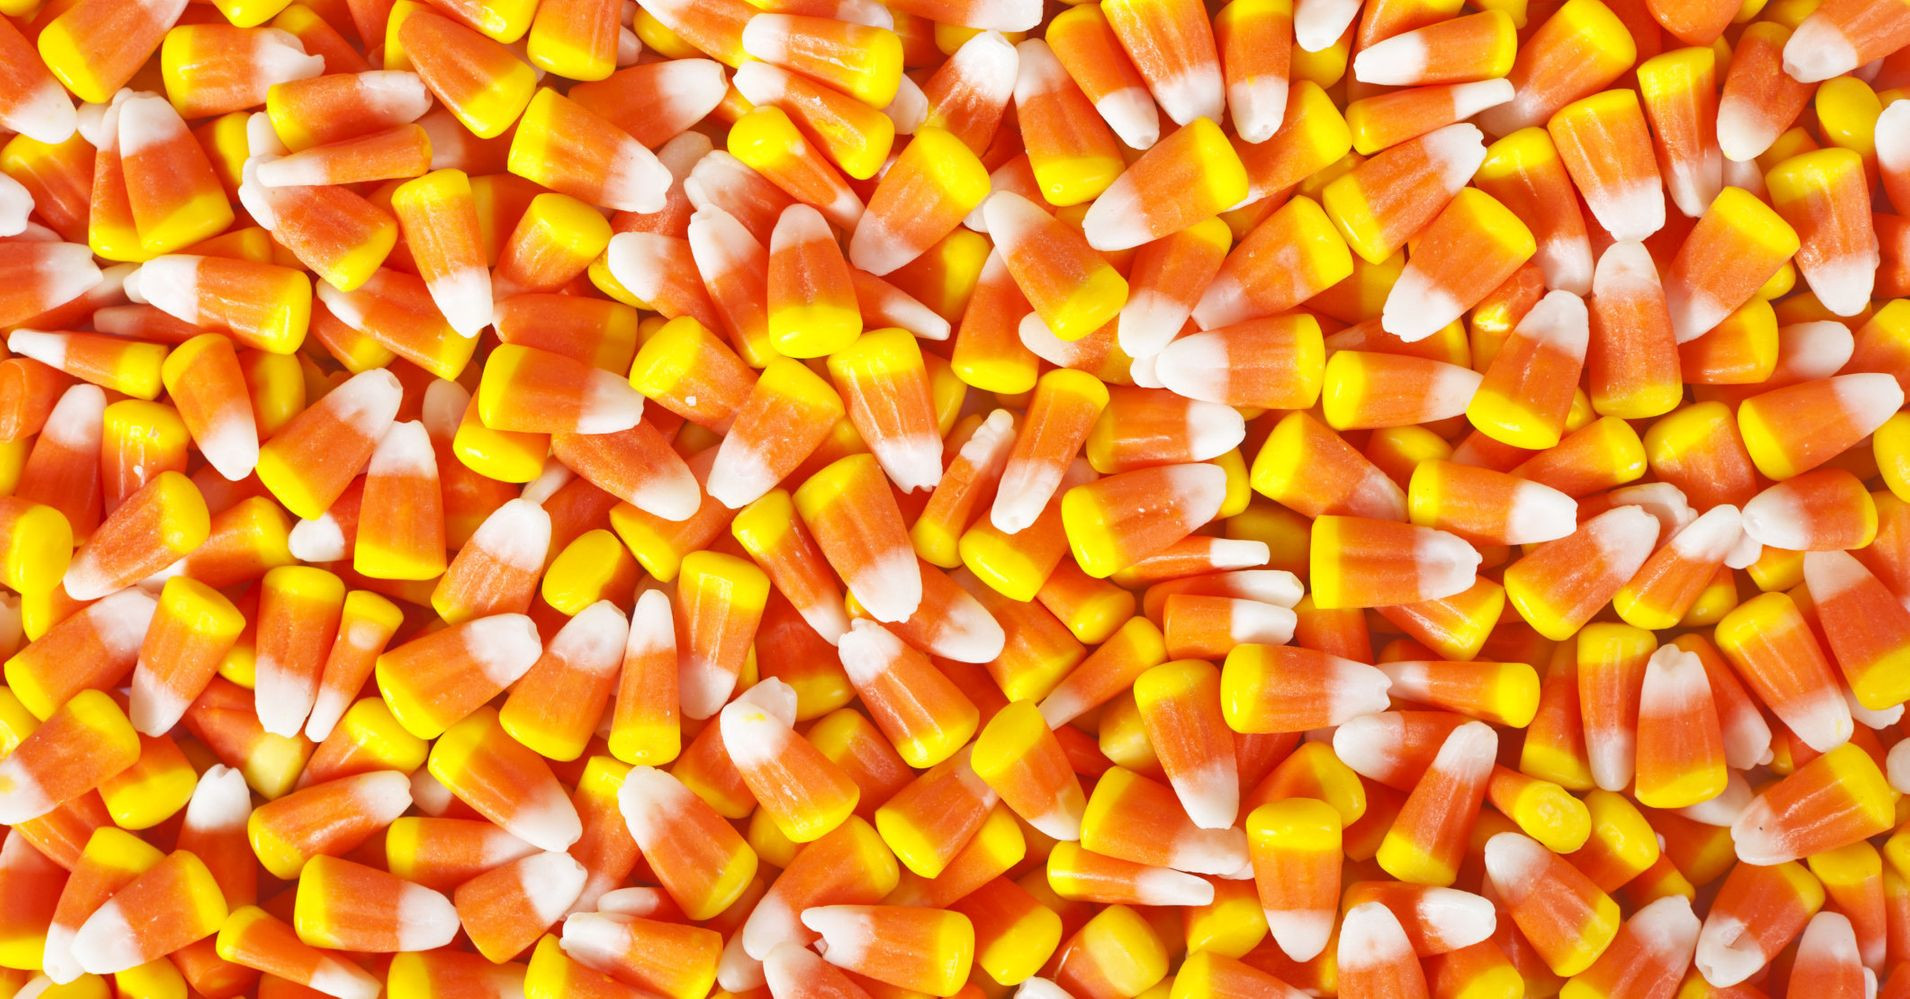 Candy Corn Cob Gw2
 The Great Candy Corn Debate Rages Twitter